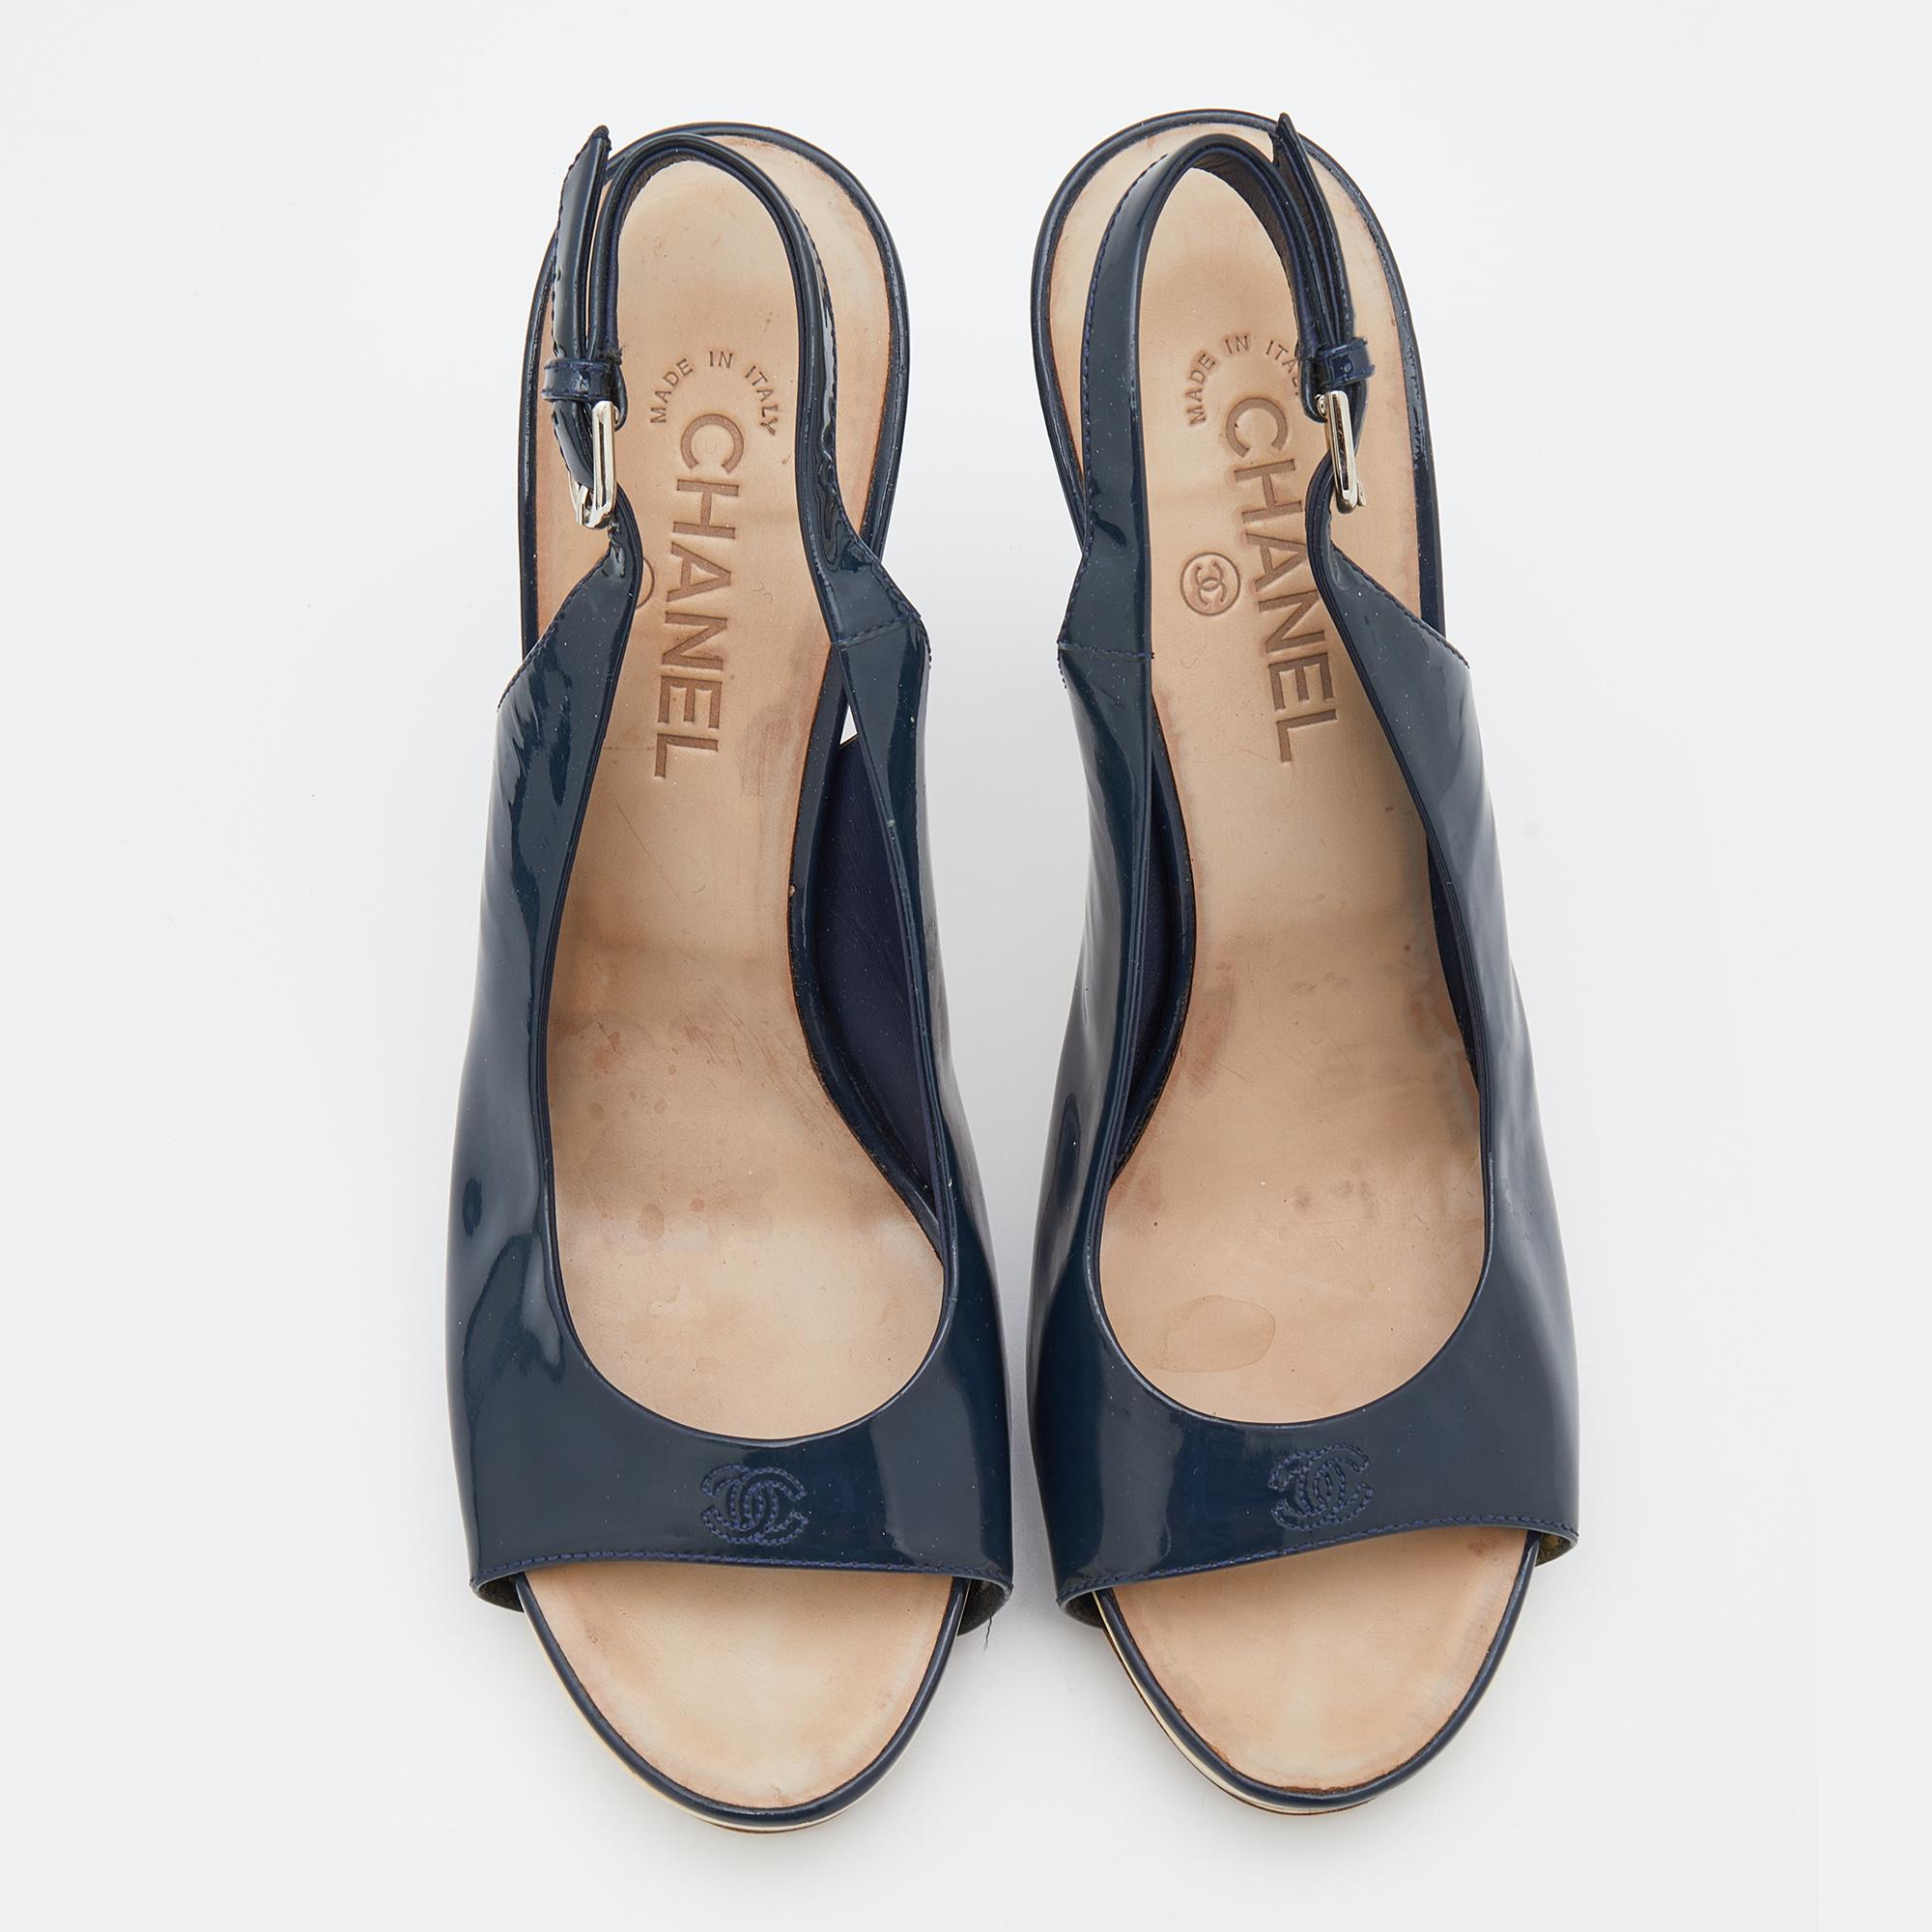 Offering comfort with elegance, these Chanel slingback buckled sandals are a wardrobe essential. Crafted in navy blue patent leather, the open toe features a platform. The pumps have insole lining that profiles the brand's signature and are complete